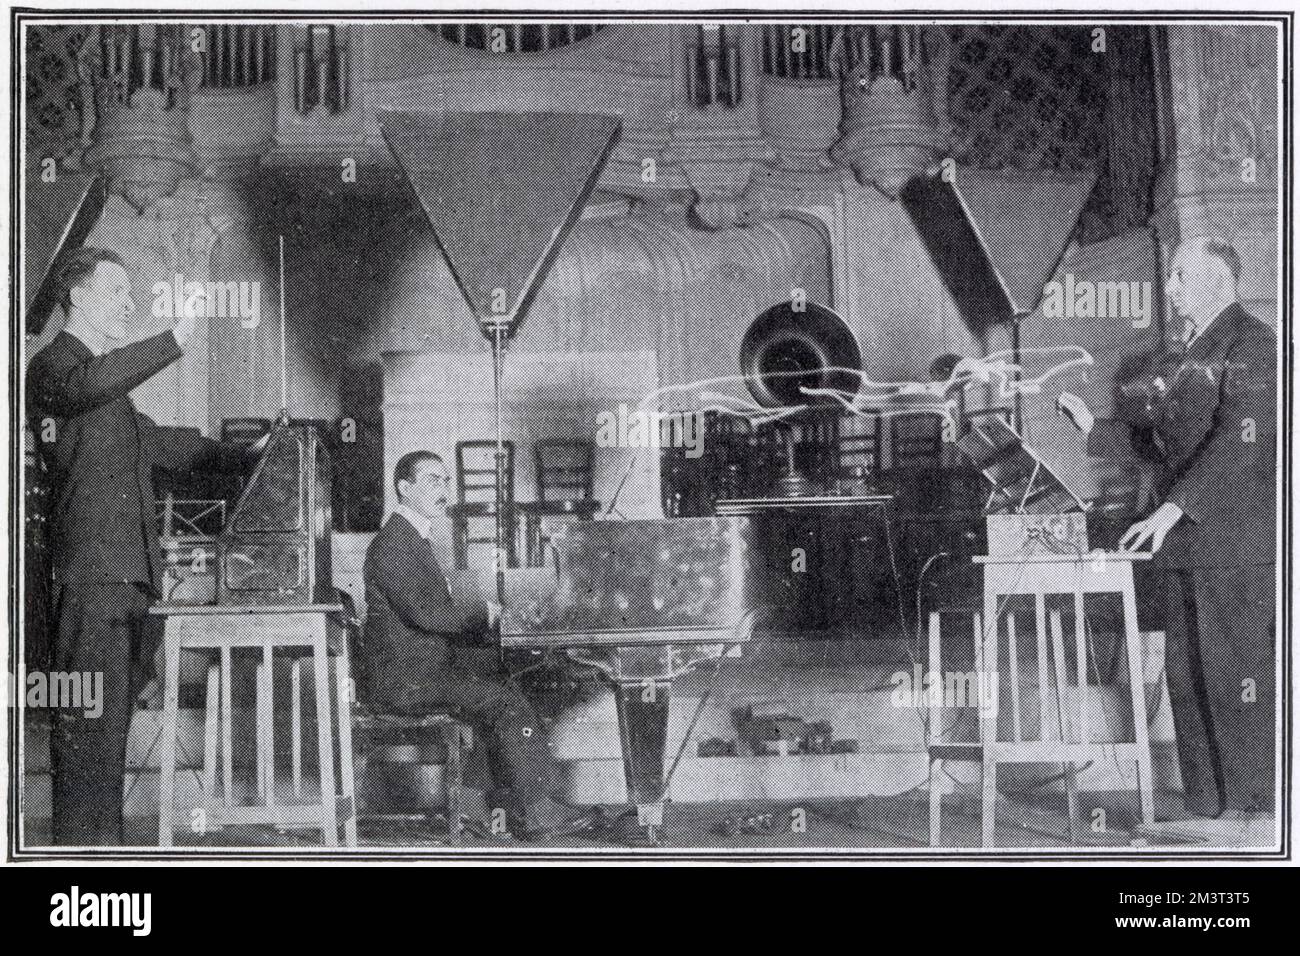 Leon Theremin (1896 - 1993) giving a demonstration of his electronic musical instrument in concert at the Albert Hall (pictured) where he played Schubert's 'Ave Maria' and other airs. He is shown here in duet with Mr Goldberg. Theremin was a Russian and Soviet inventor, most famous for his invention of the theremin, one of the first electronic musical instruments and the first to be mass-produced. Stock Photo